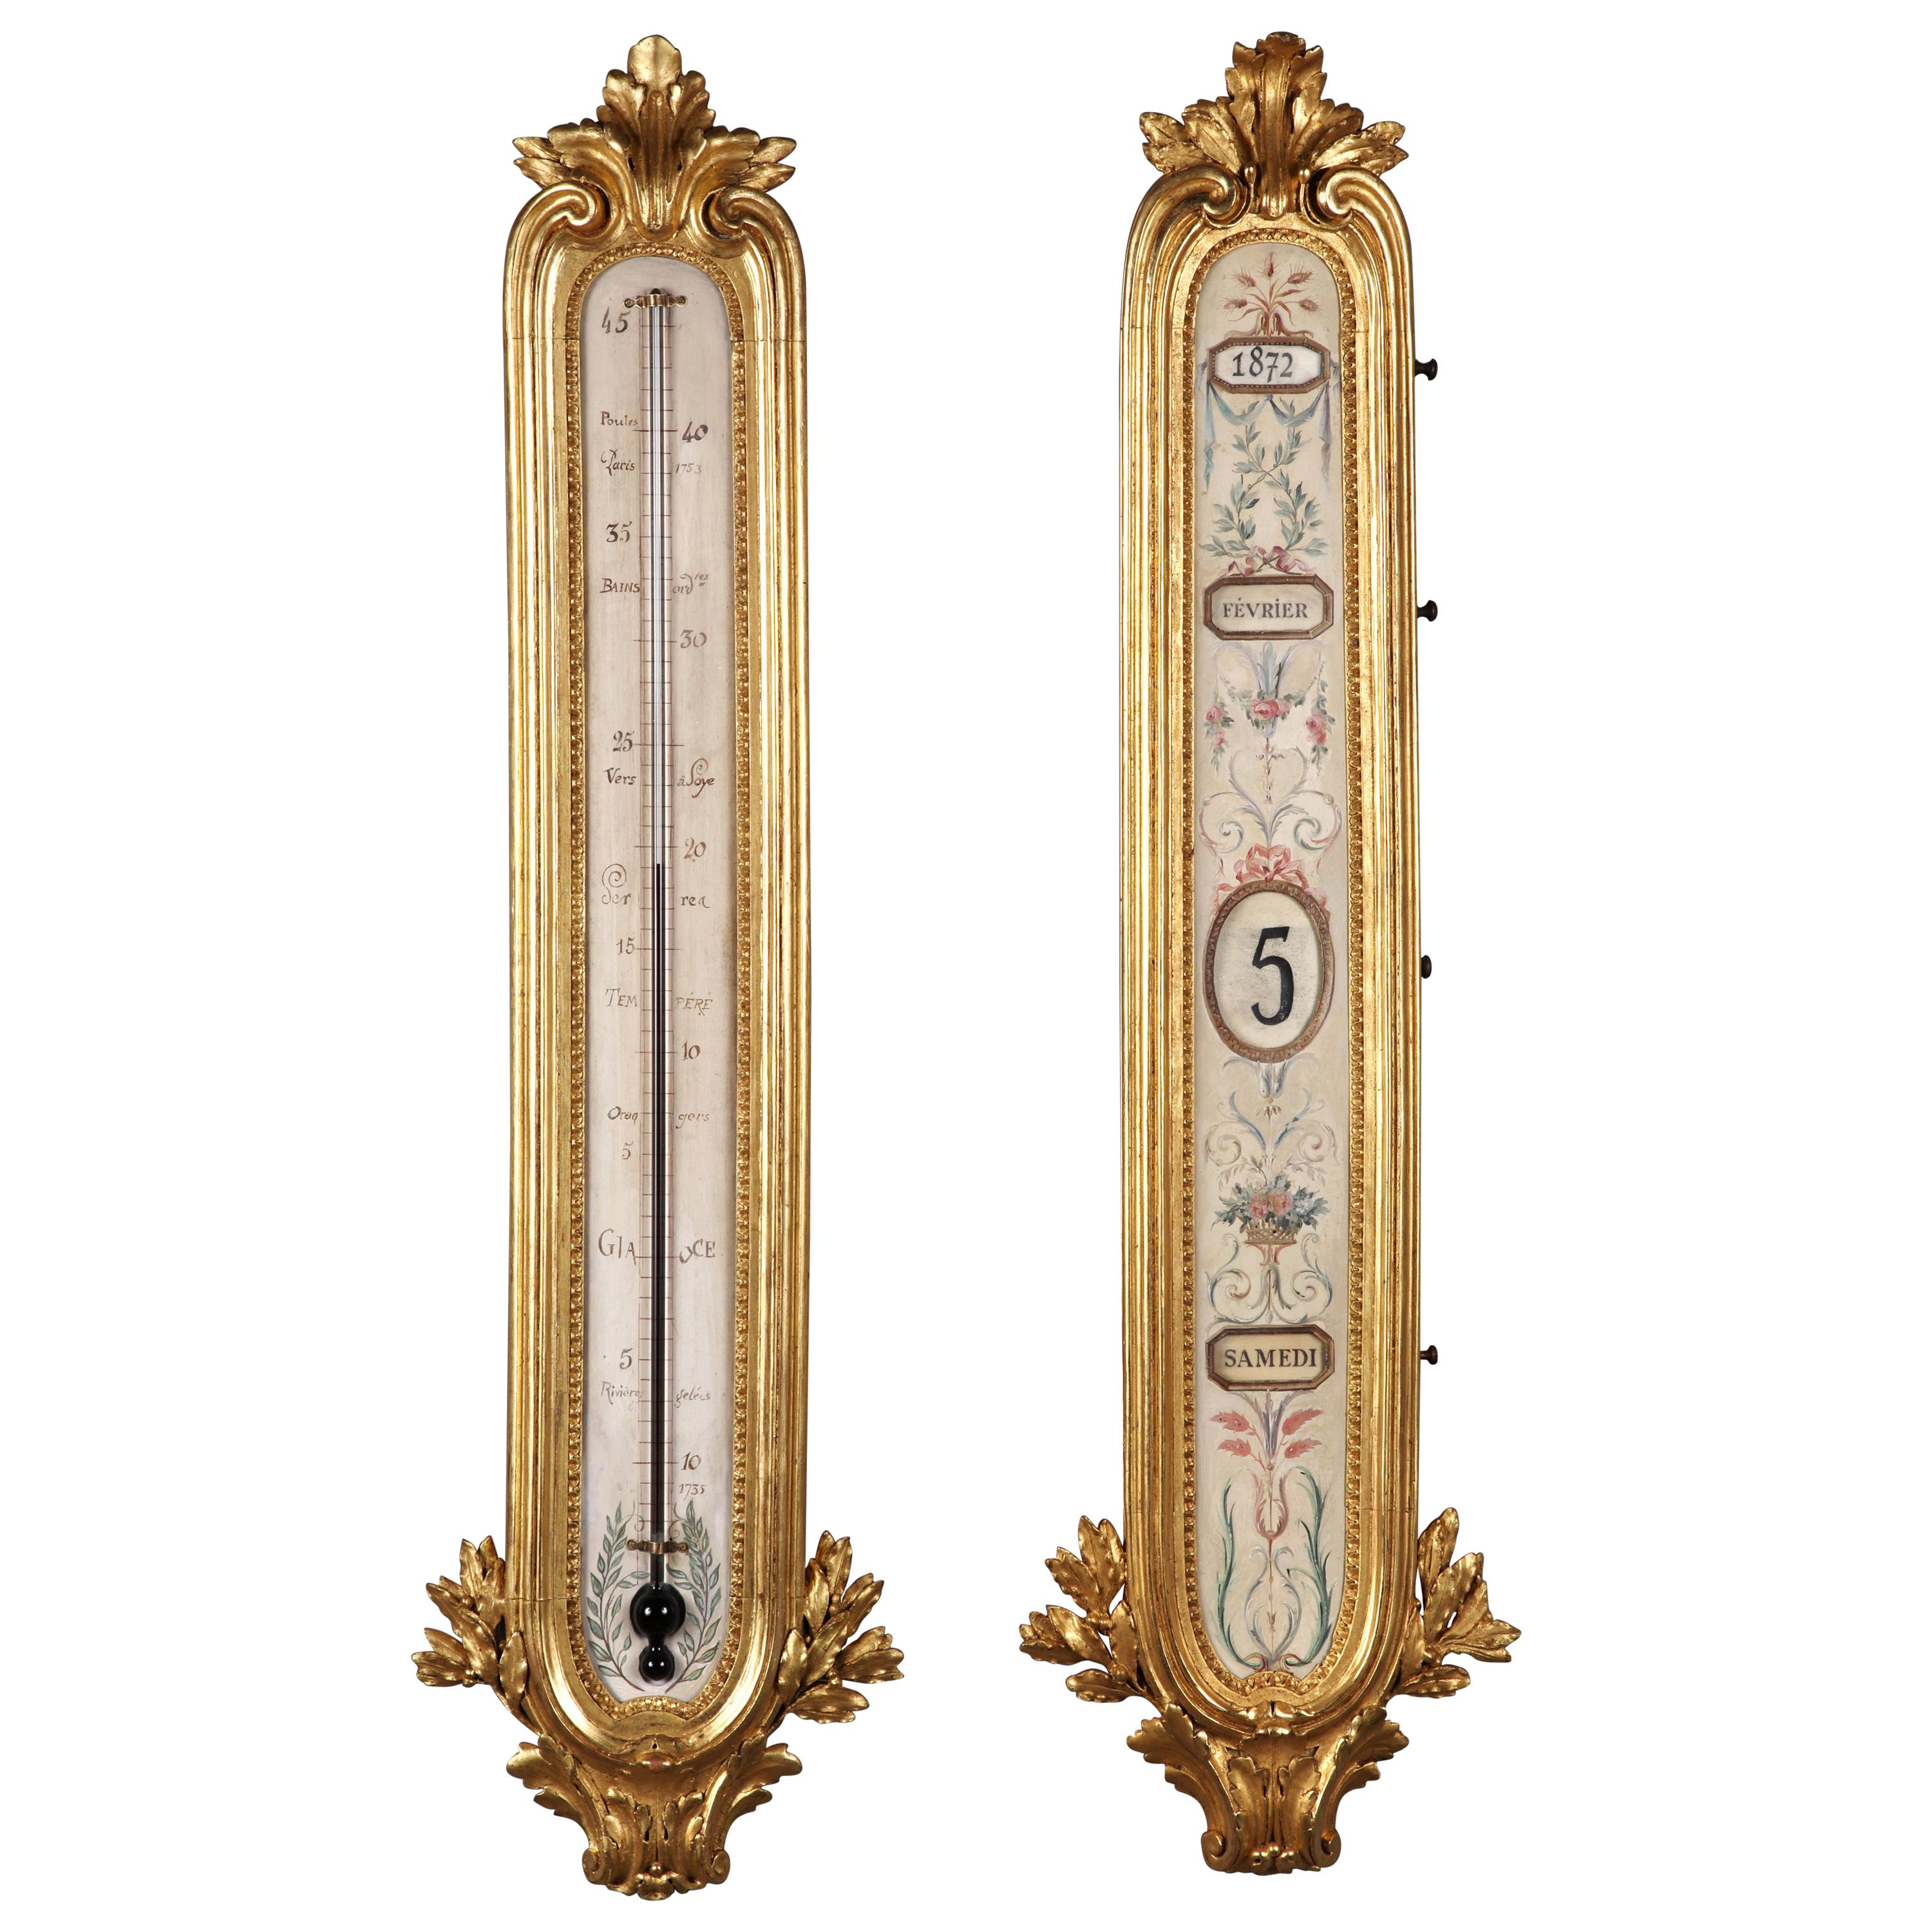 Giltwood Thermometer & Perpetual Calendar Attributed to F.Linke, France, c. 1880